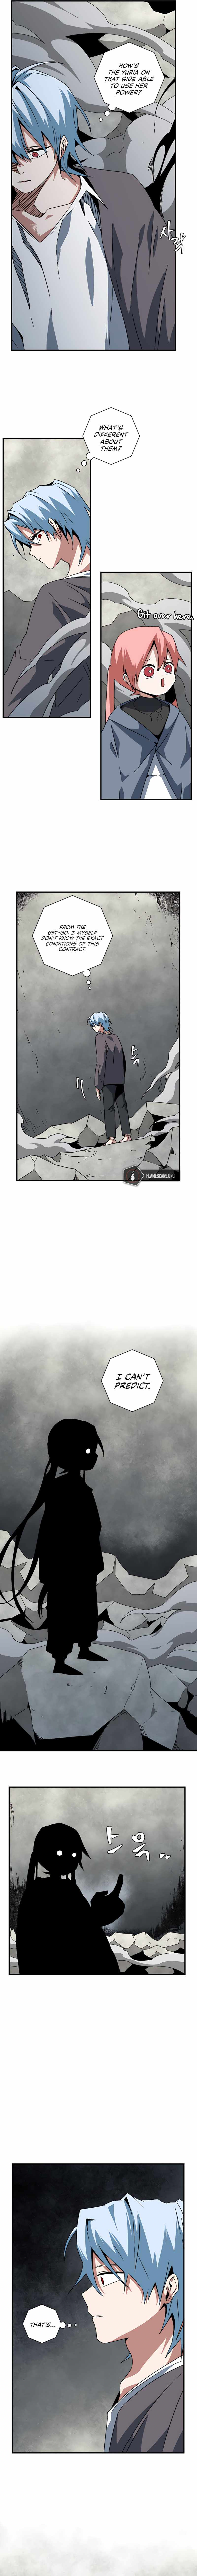 One Step to Being Dark Lord Chapter 58-eng-li - Page 3